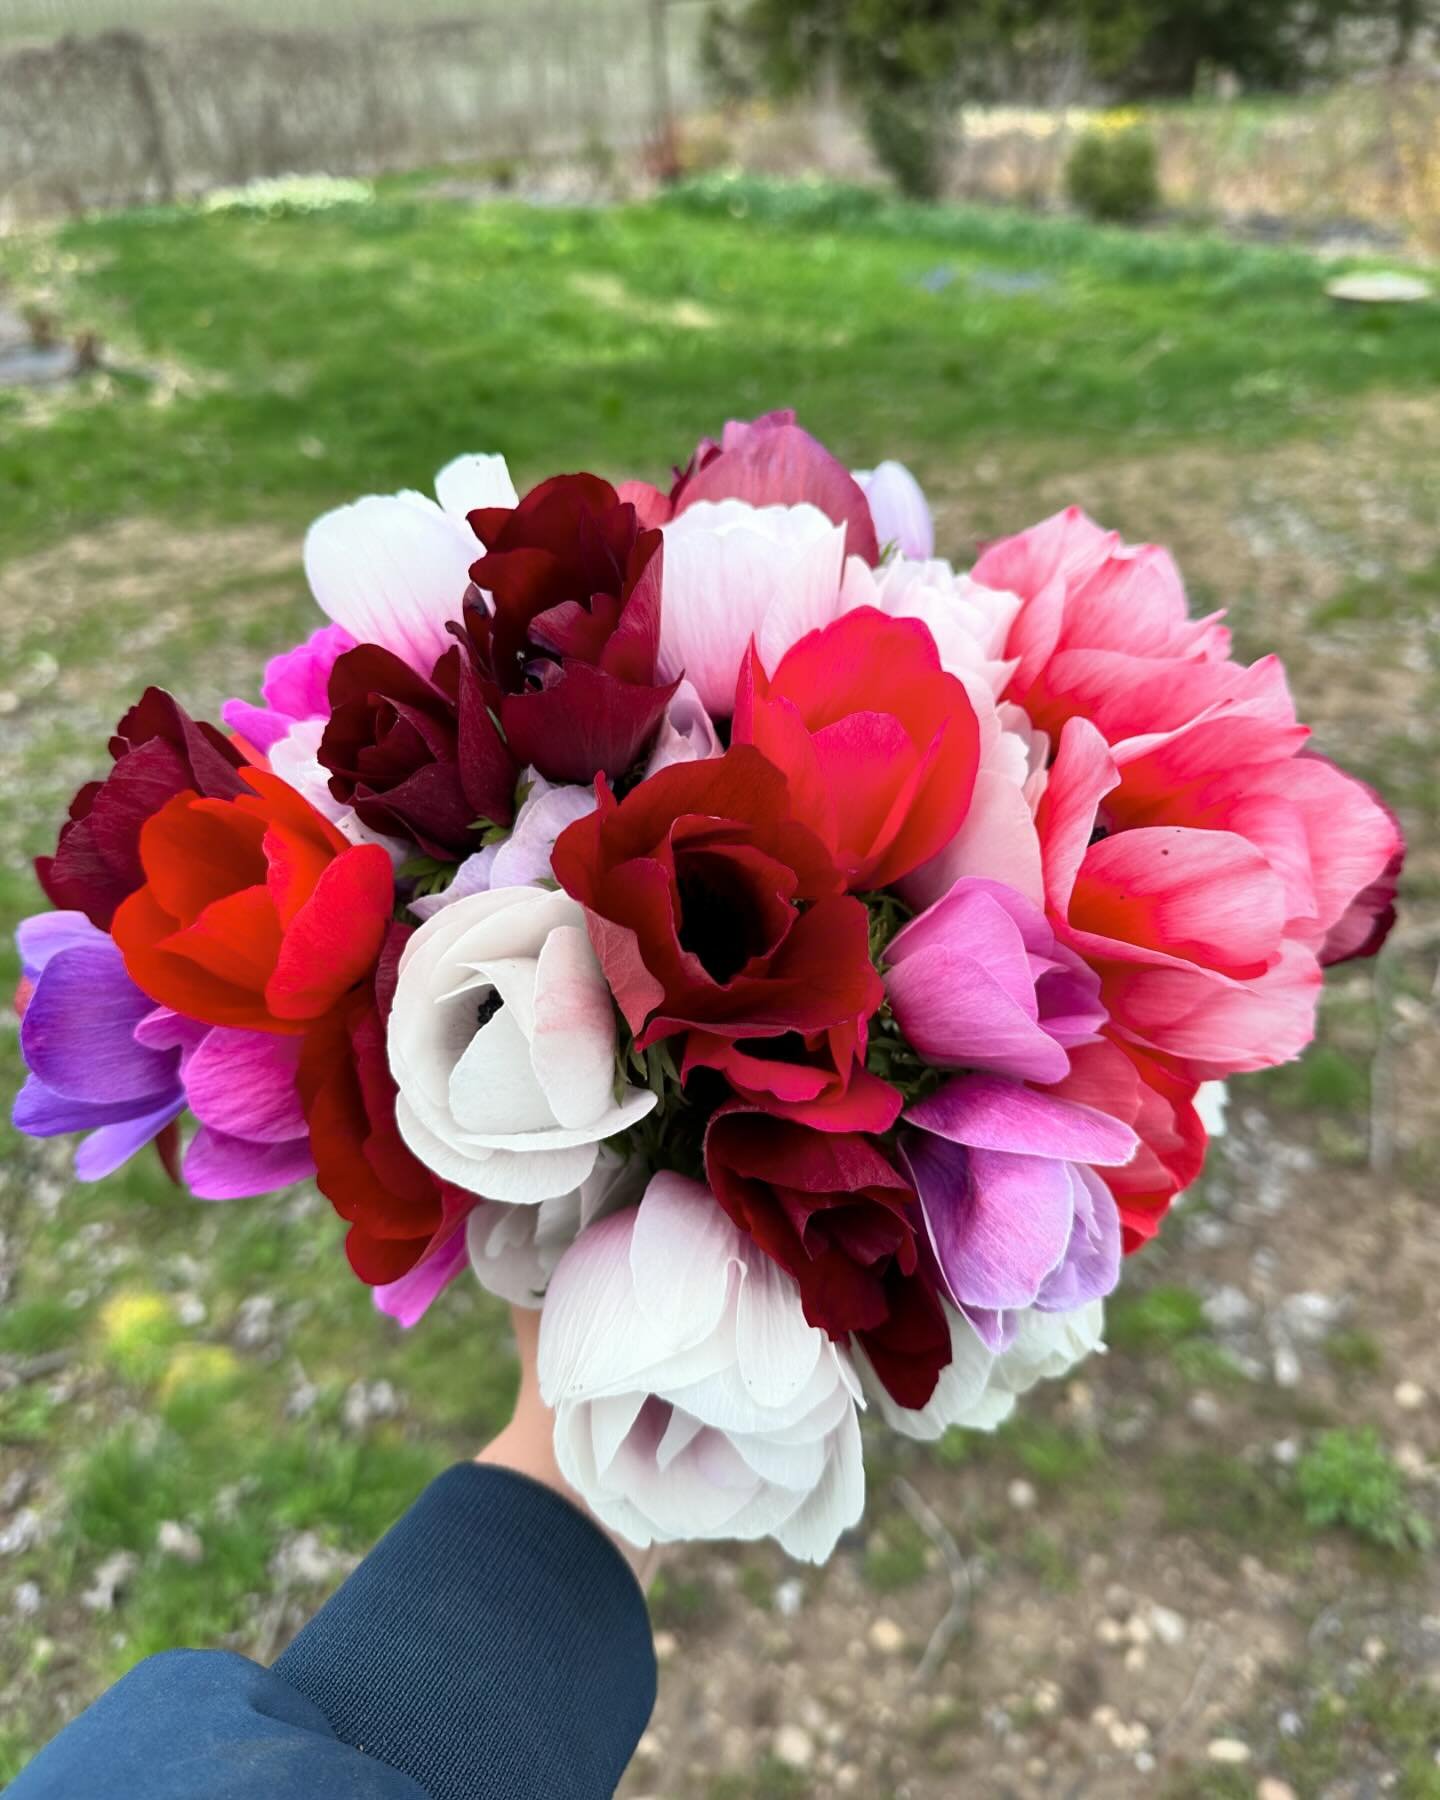 Things are moving fast out in the field with the warmer temps. We have seen this week! 

These are the first anemones that I dead head off. They are short stems and cannot be sold, but I&rsquo;ll enjoy them in my house for the weekend 🤩

With how fa